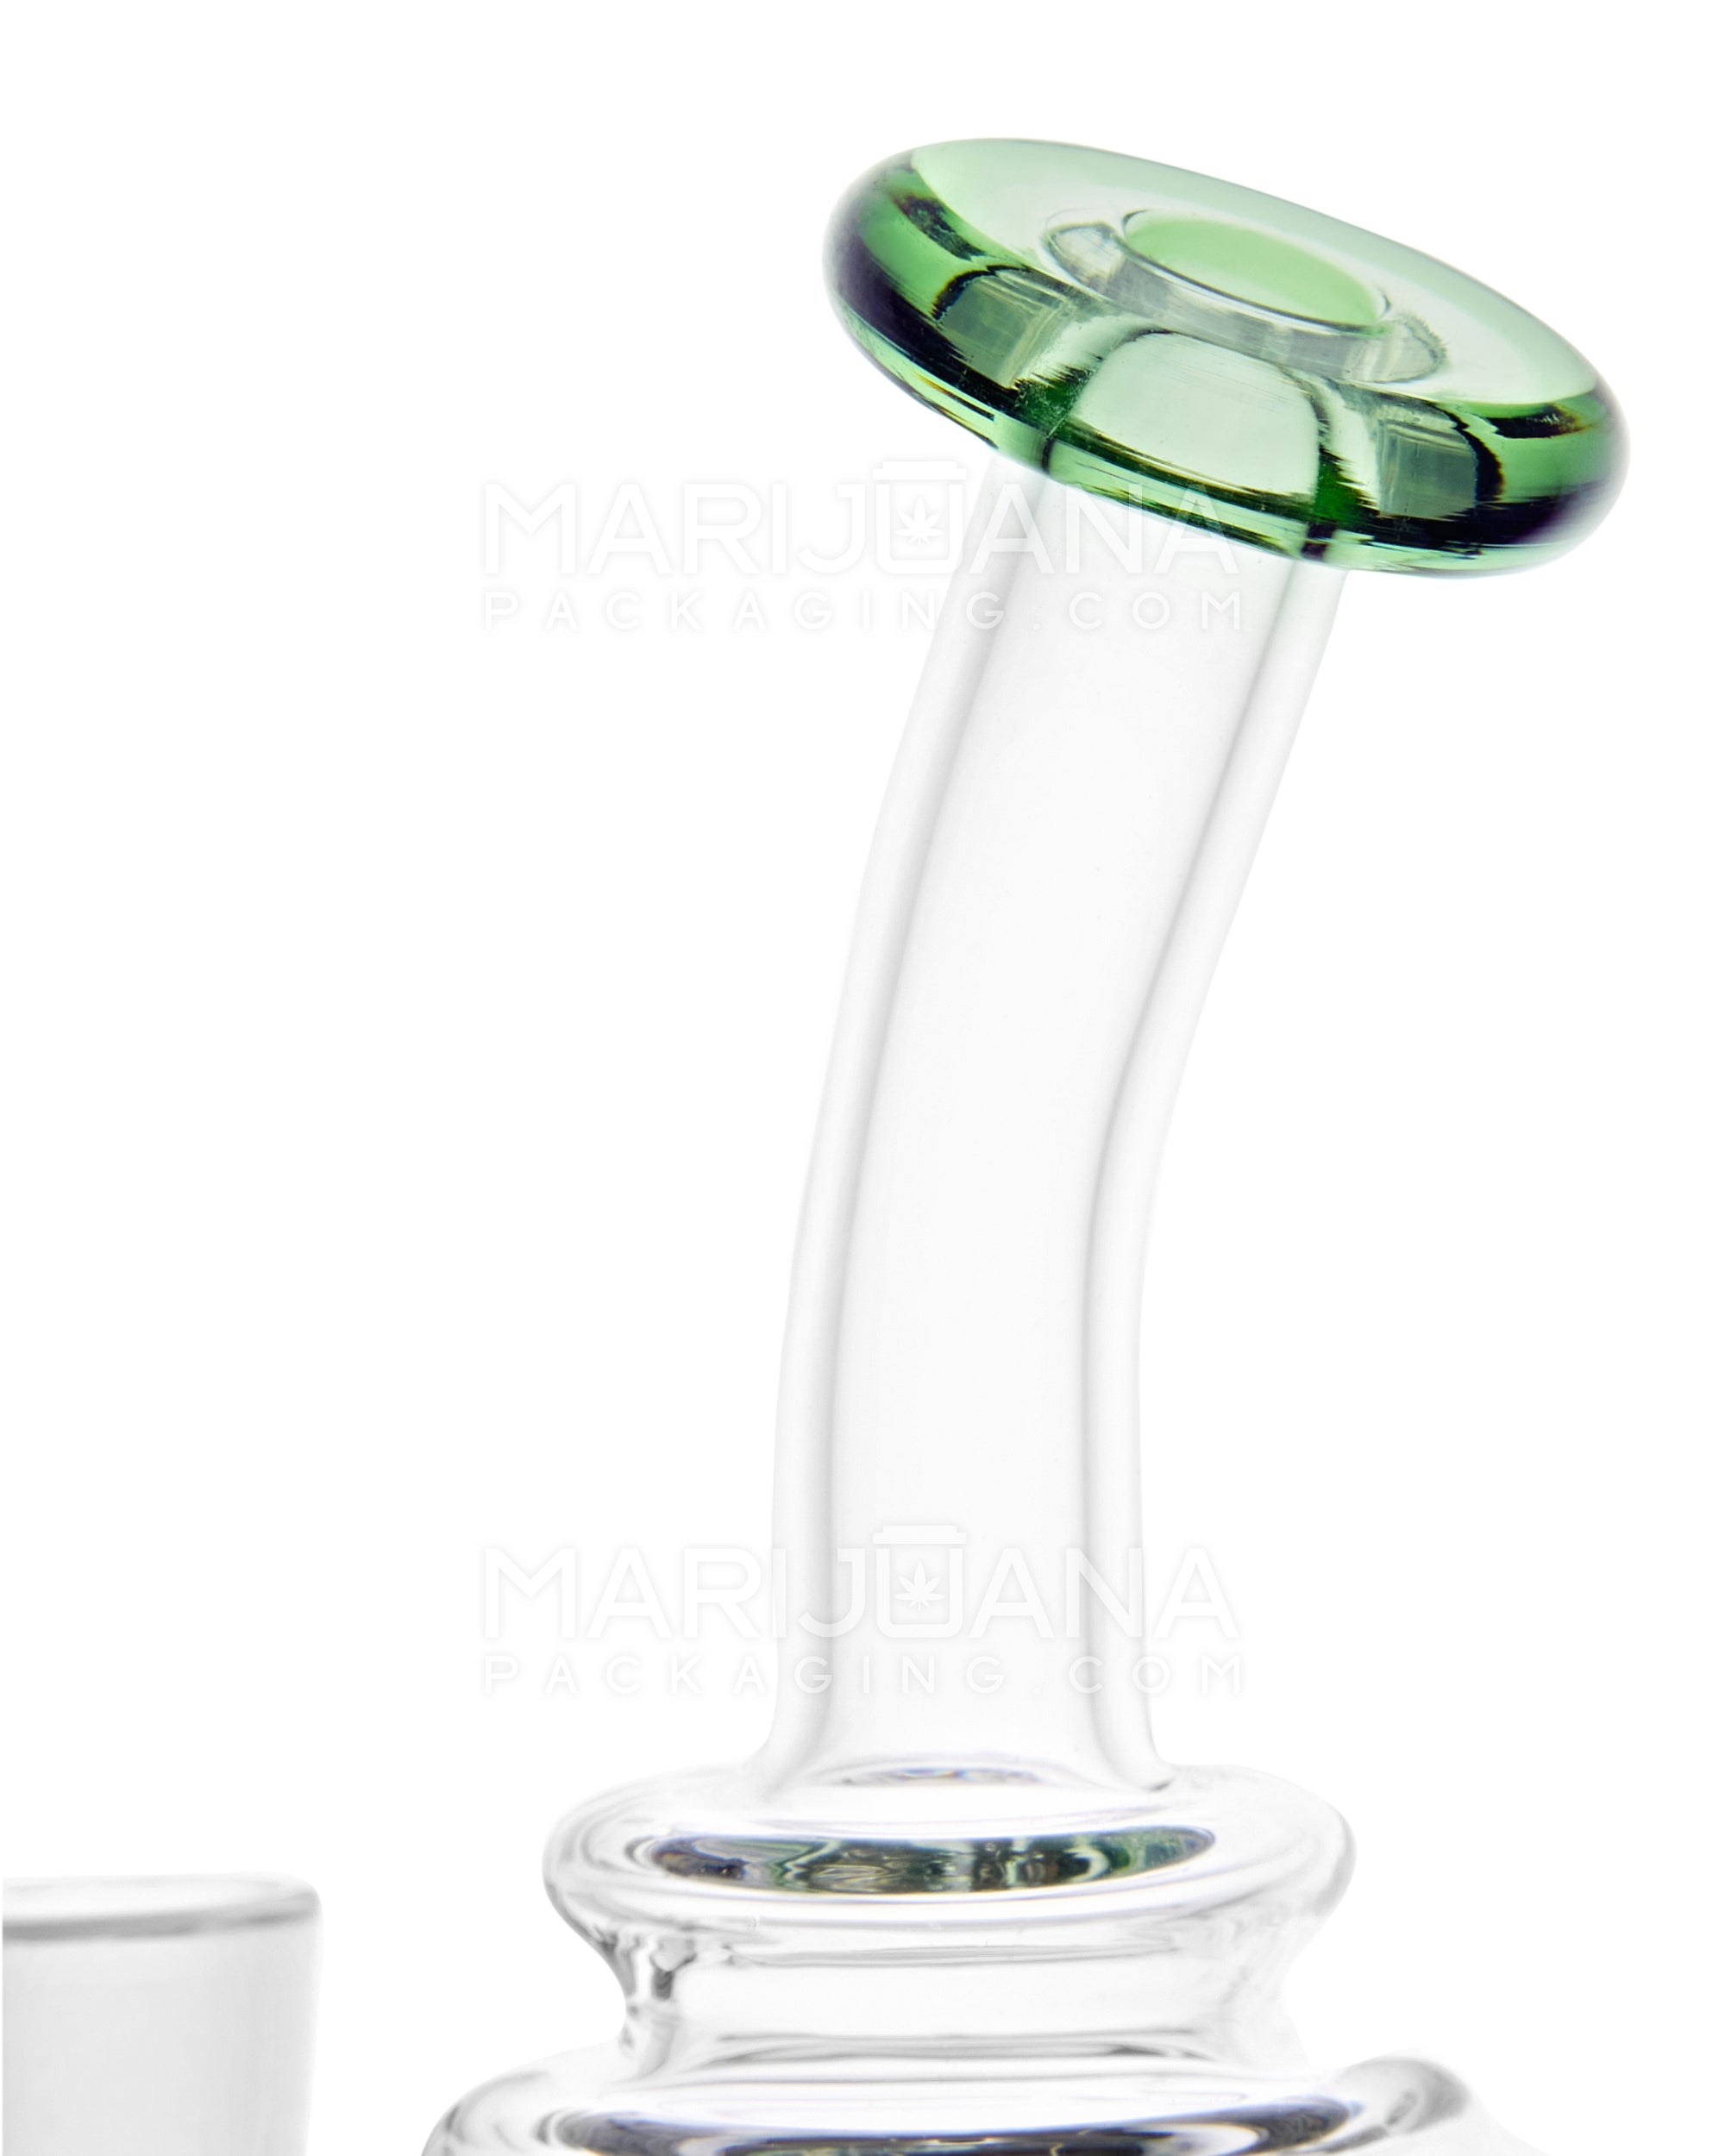 USA Glass | Bent Neck Dual Uptake Recycler Water Pipe w/ Showerhead Perc | 5.5in Tall - 10mm Bowl - Green